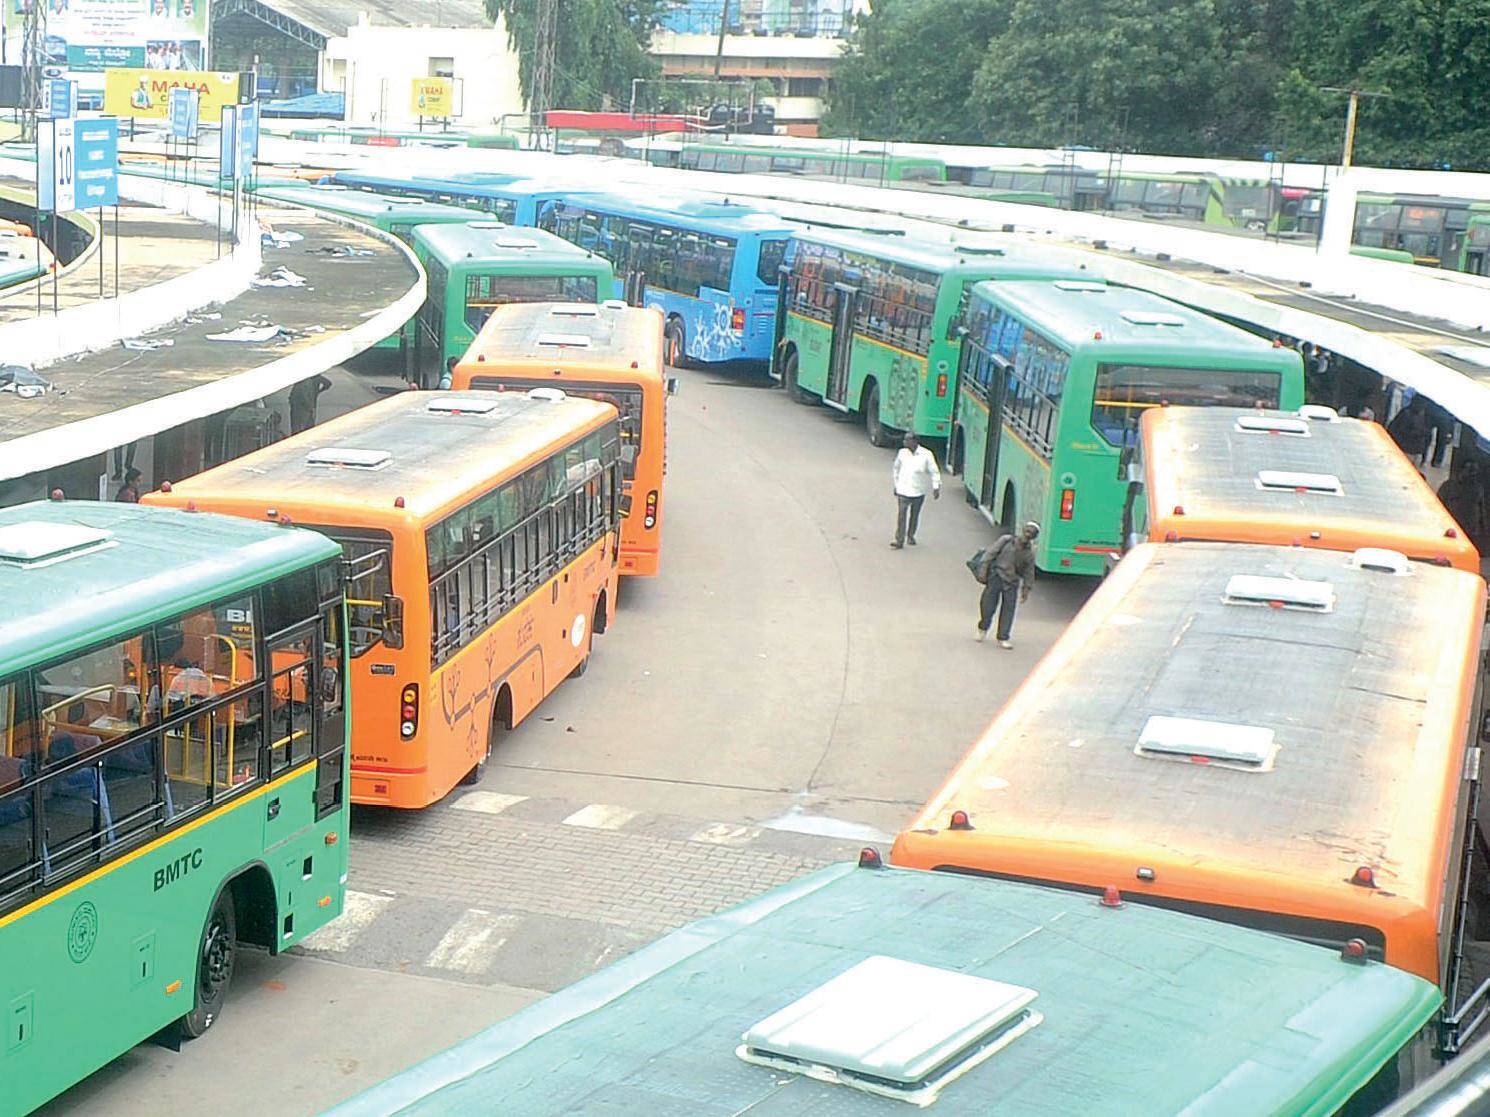 punjab government: Punjab to add 600 new buses in 2 months, Auto News, ET Auto